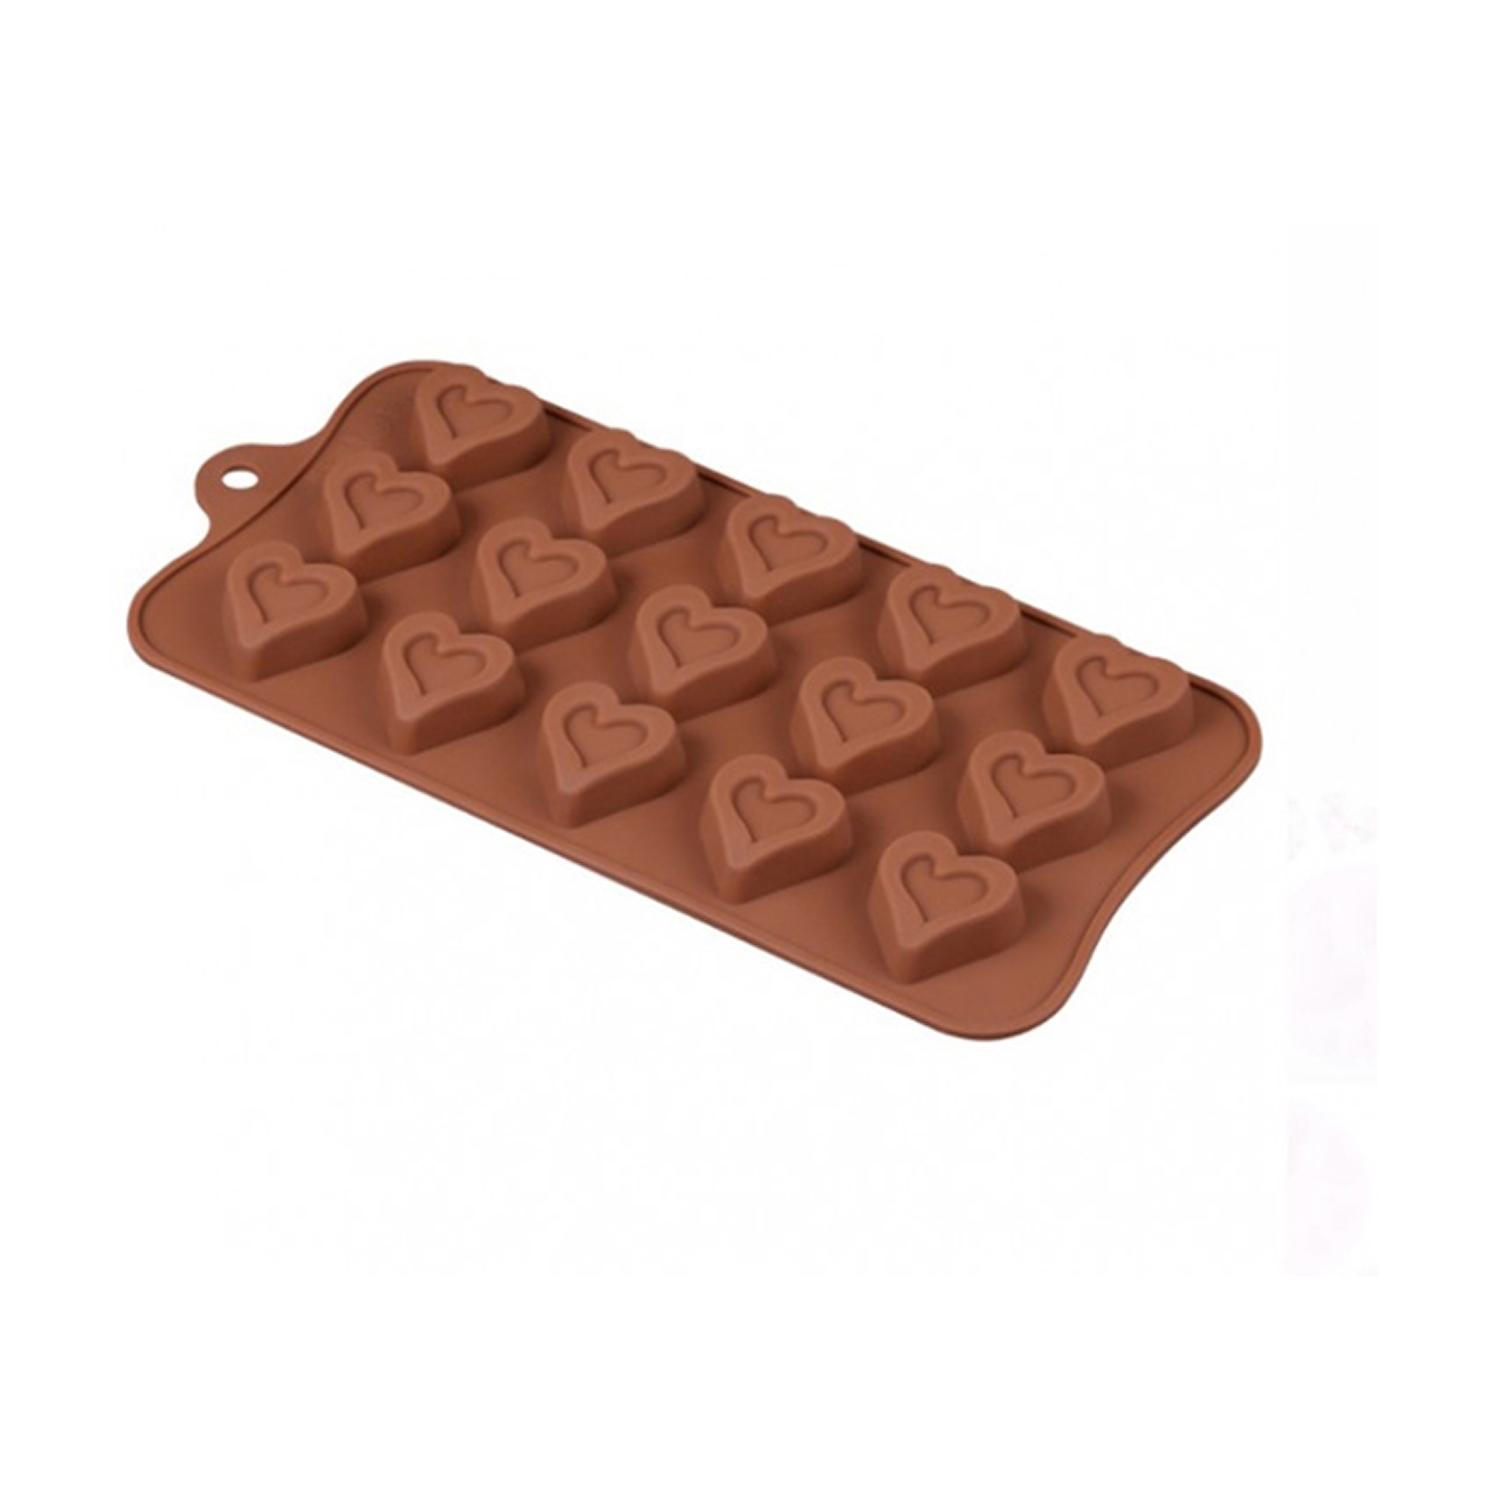 SCM0026 HEARTS 3D SILICONE CHOCOLATE MOULD